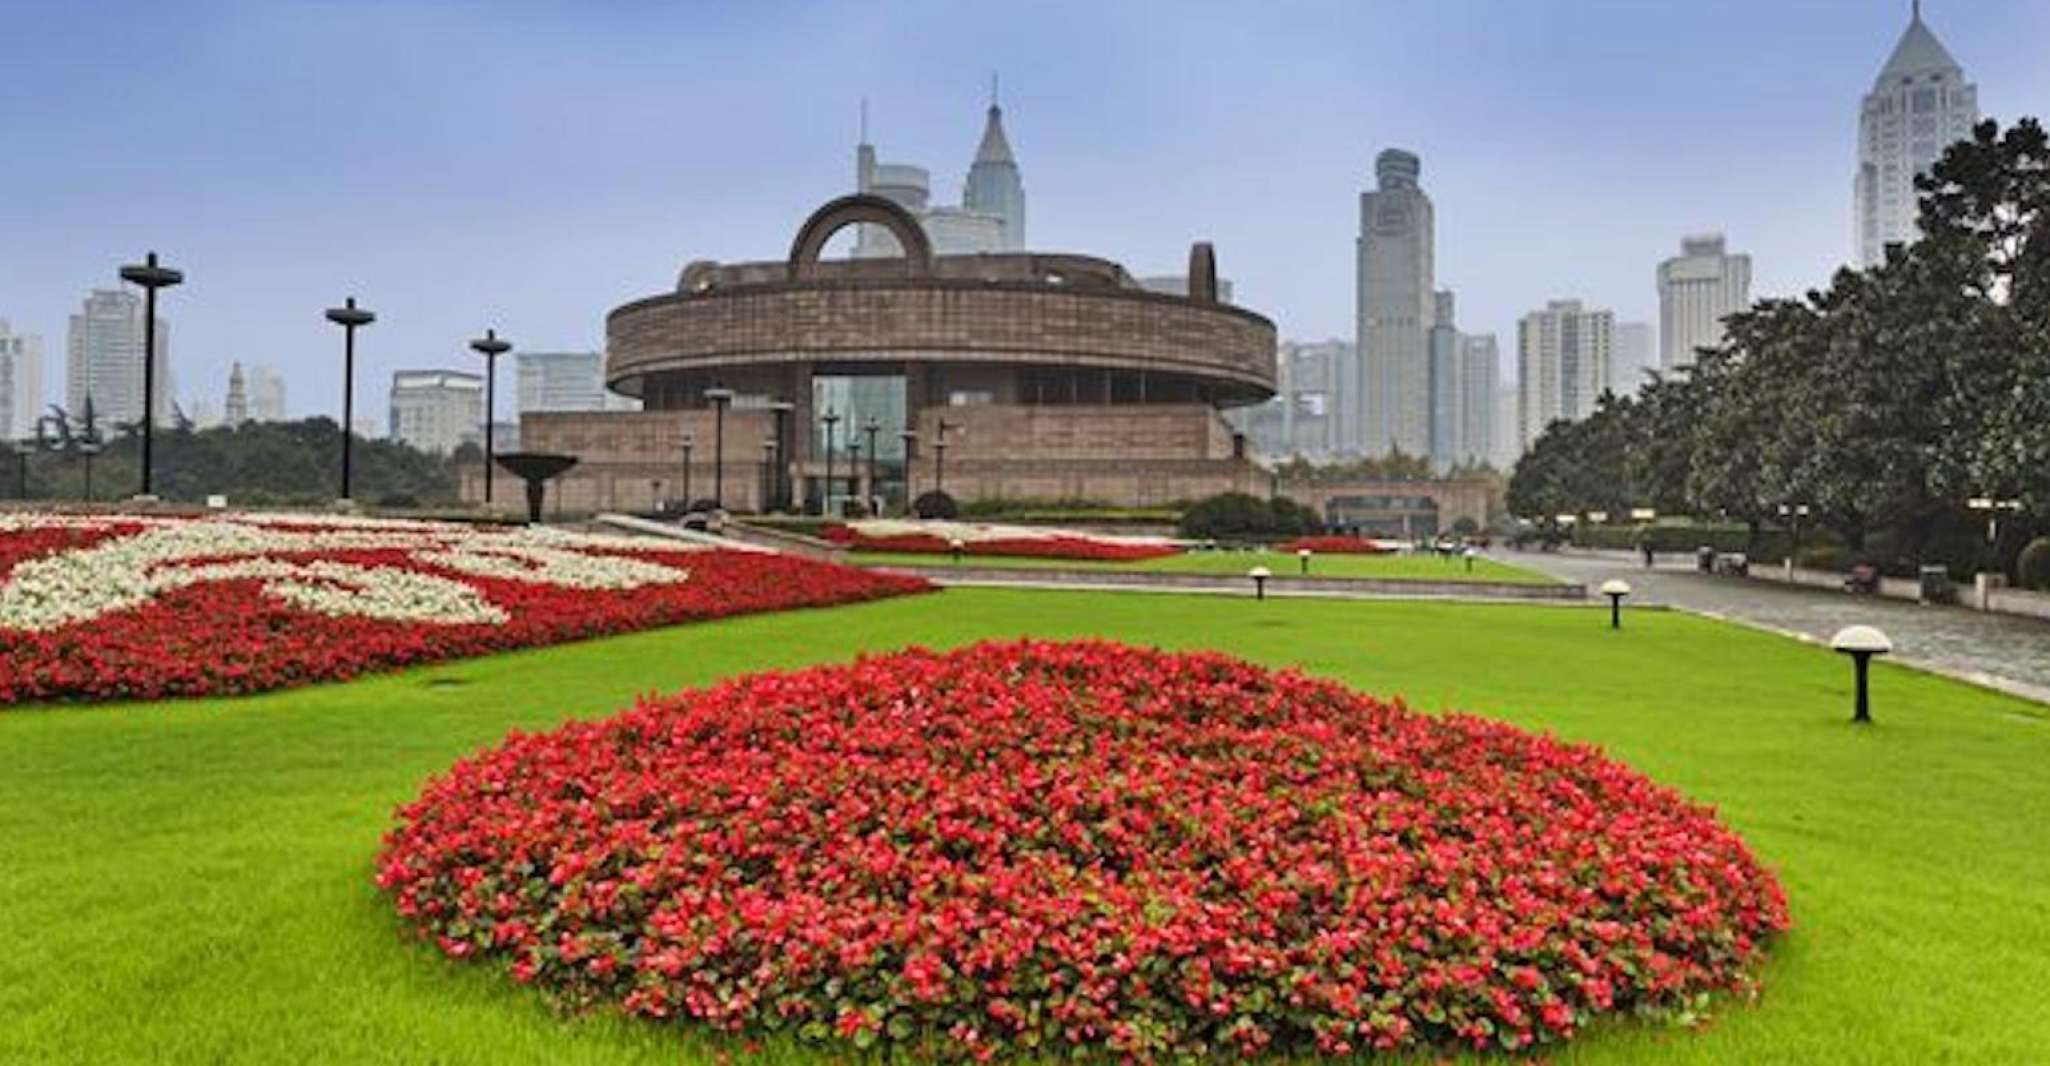 Shanghai, Hop-on Hop-off Bus Ticket and Optional Attractions - Housity